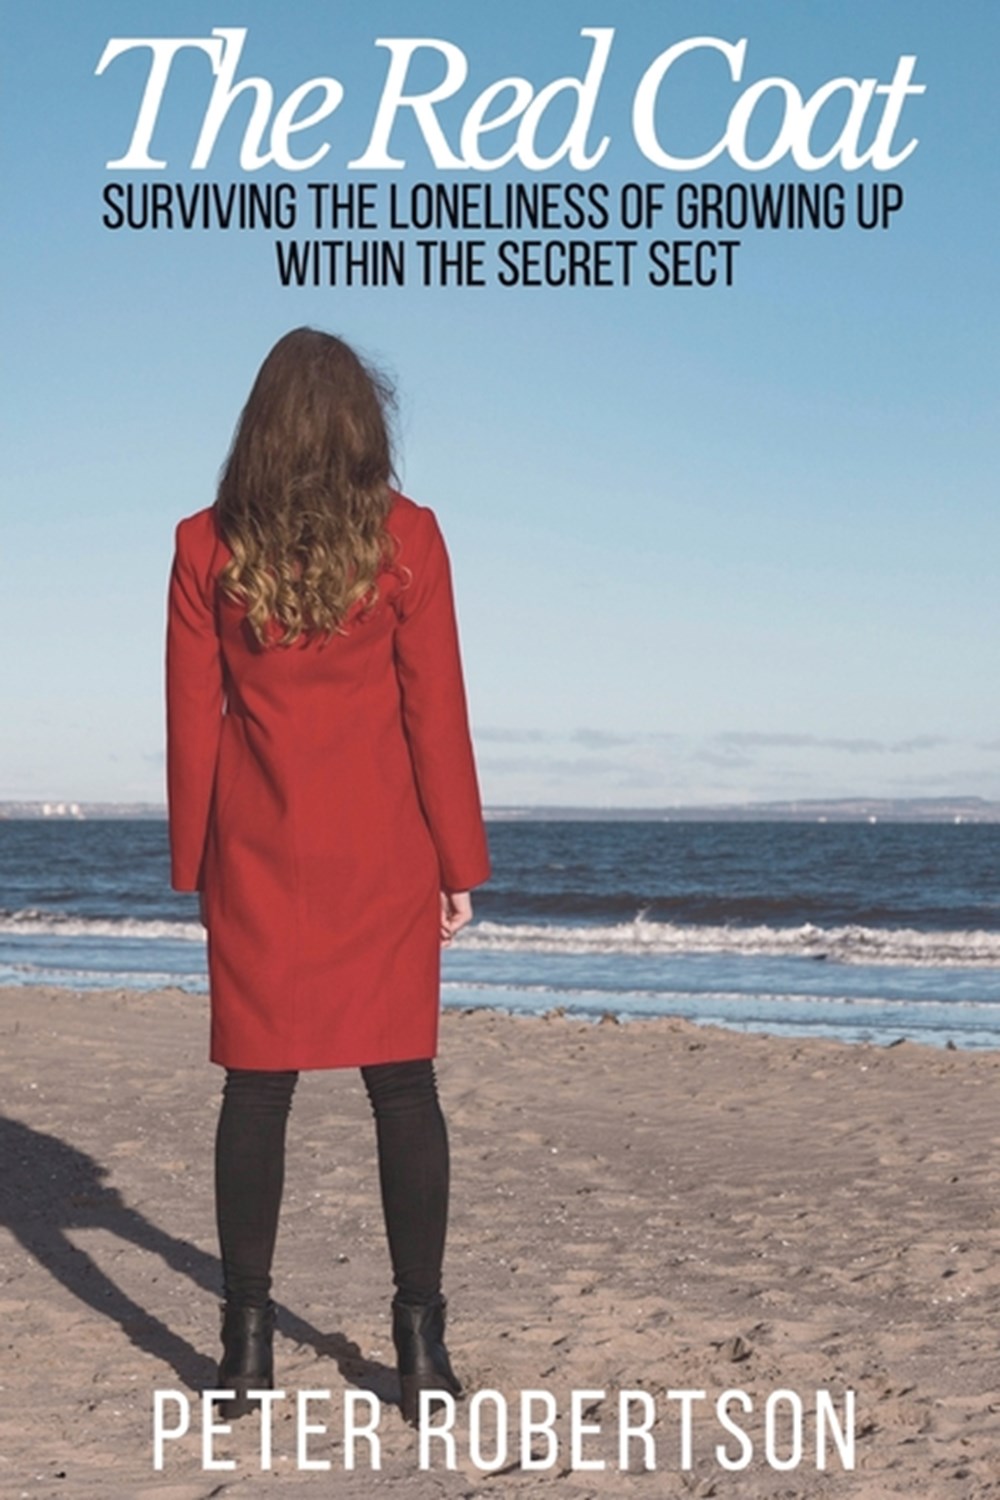 Red Coat: Surviving the Loneliness of Growing Up Within "The Secret Sect"